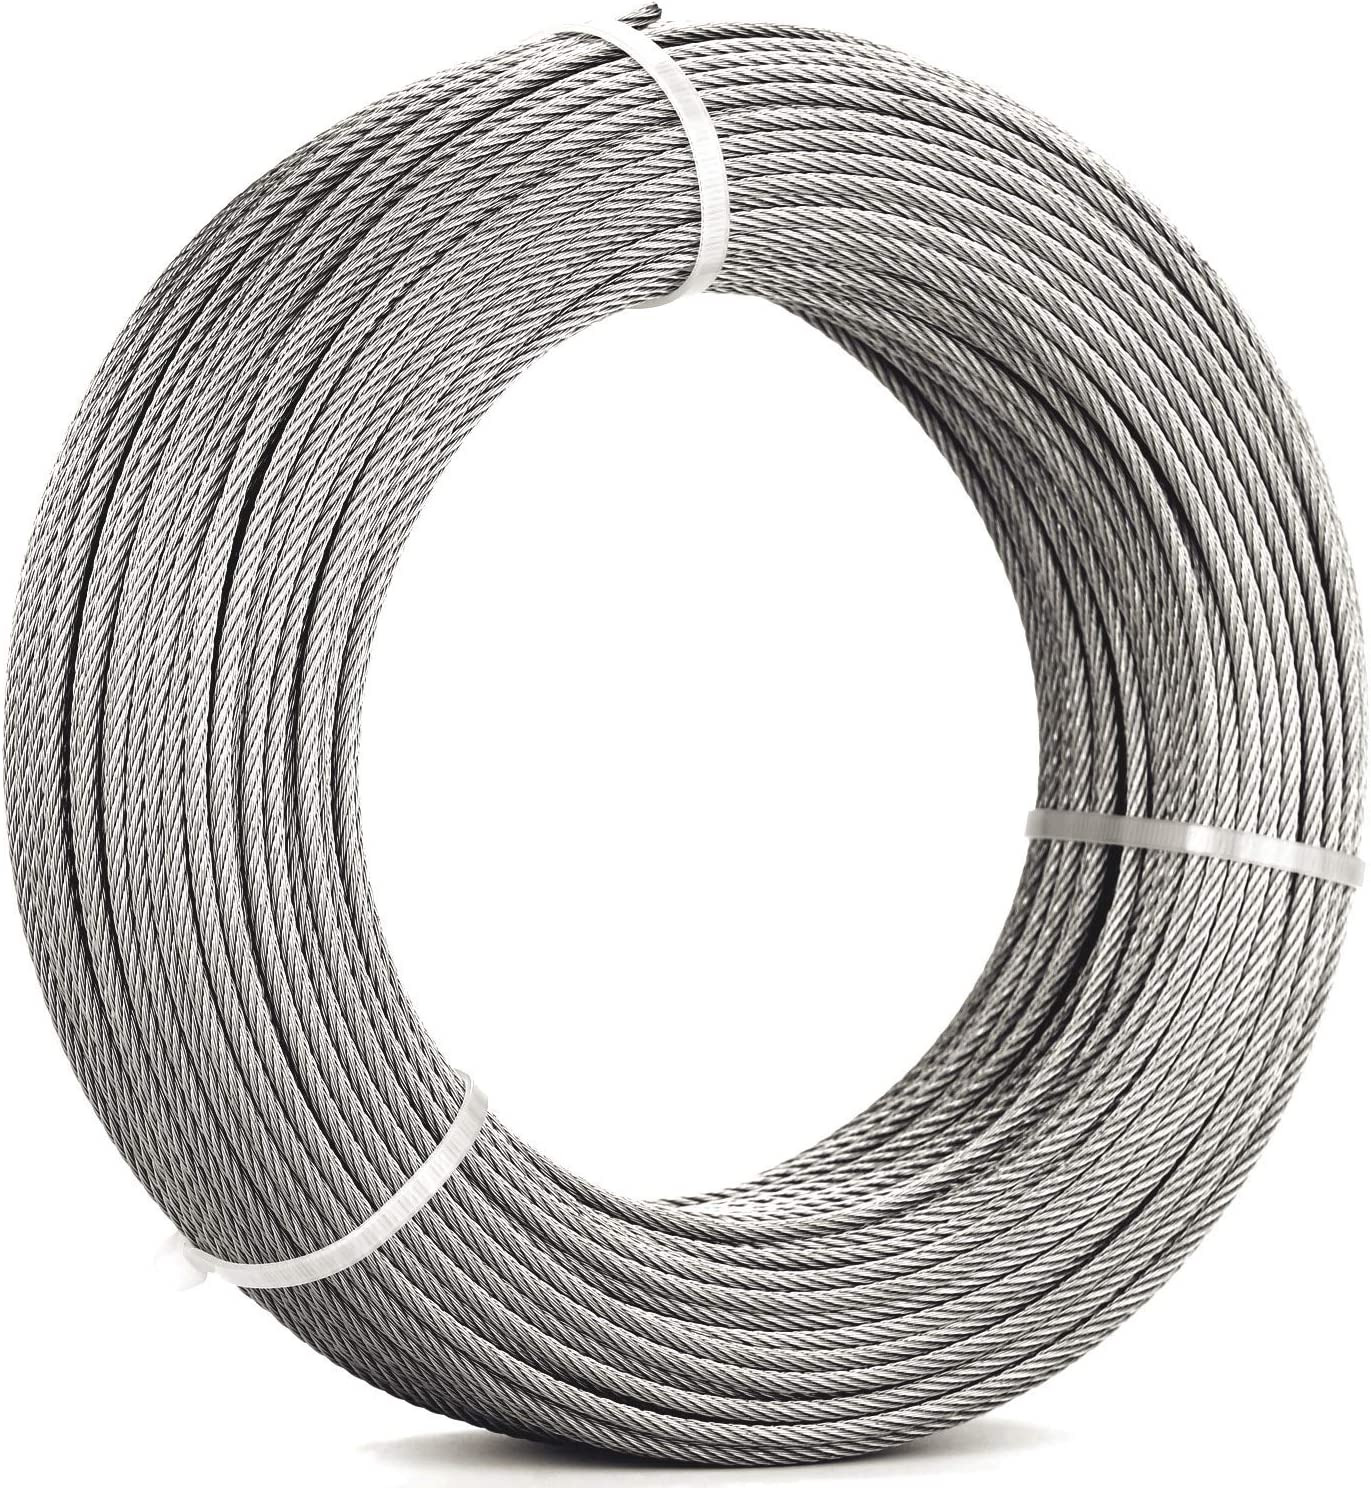 1/8 Stainless Steel Aircraft Wire Rope for Deck Cable Railing Kit,7X7 300Feet T3